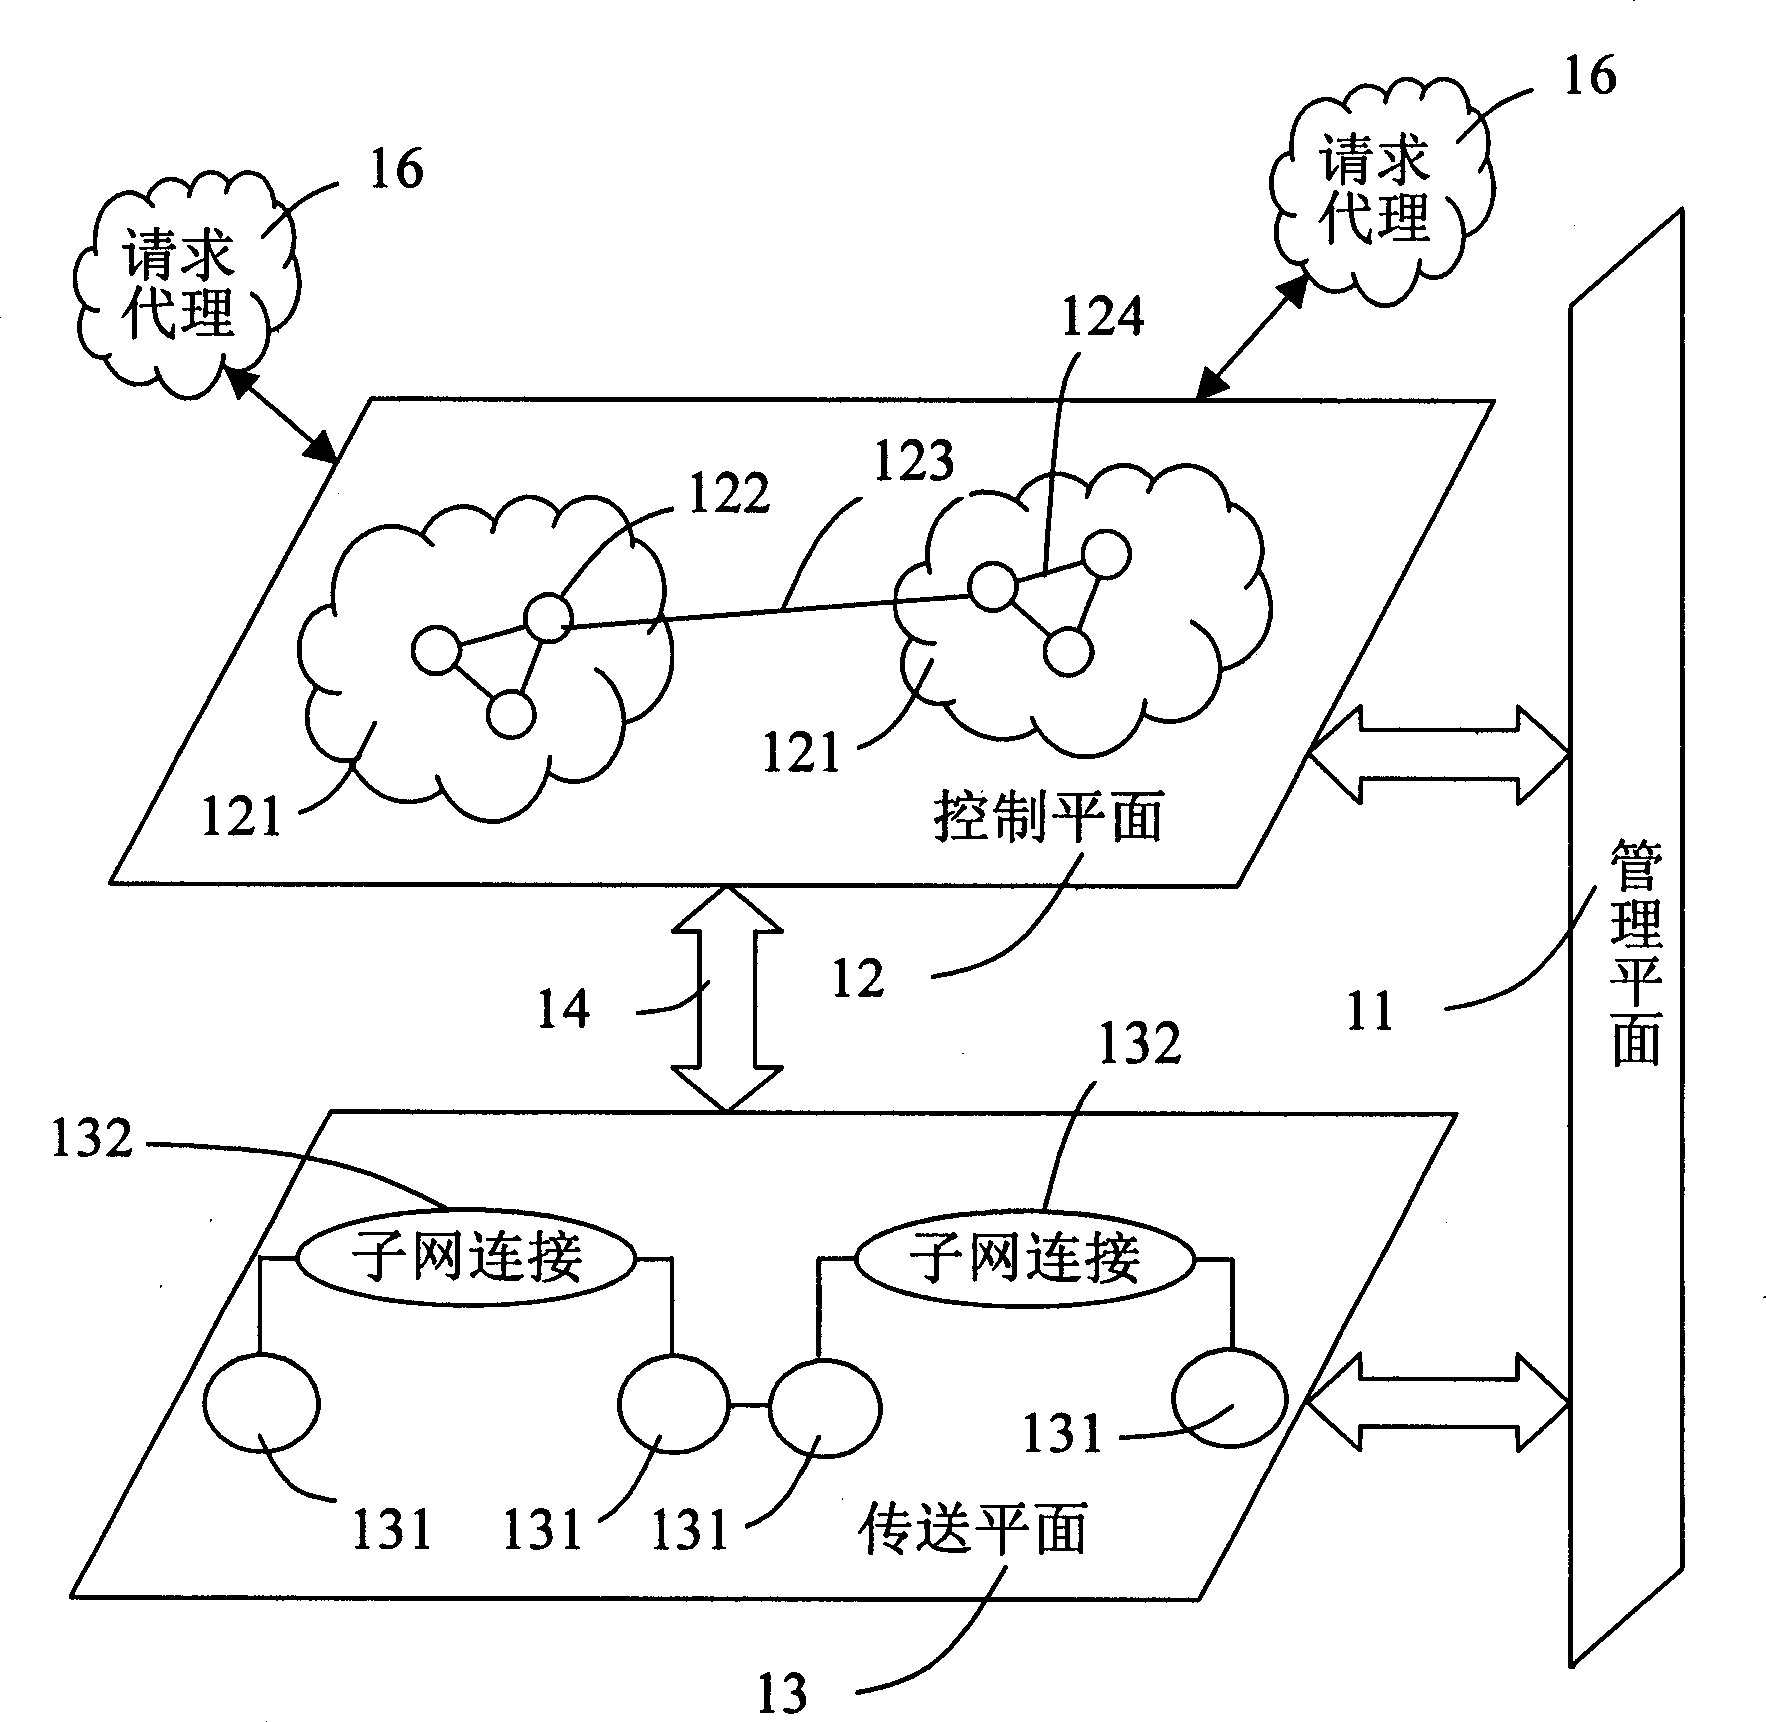 Method of path selecting in intelligent optical network